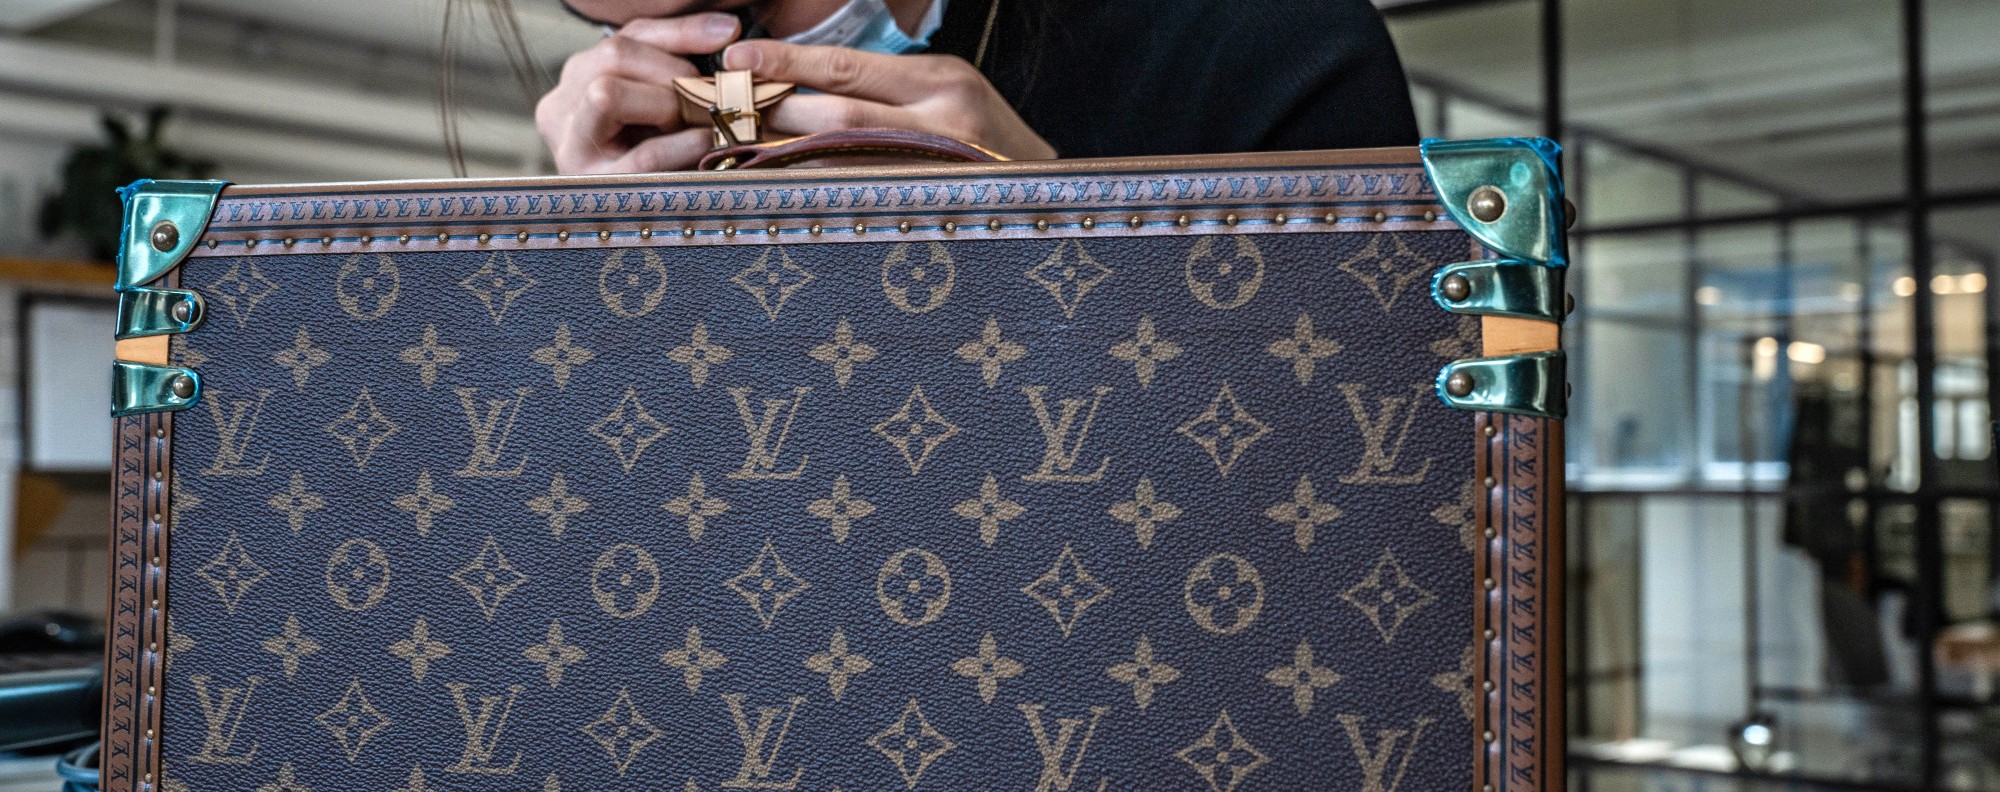 Top Trunks: Louis Vuitton's forever fashionable suitcases